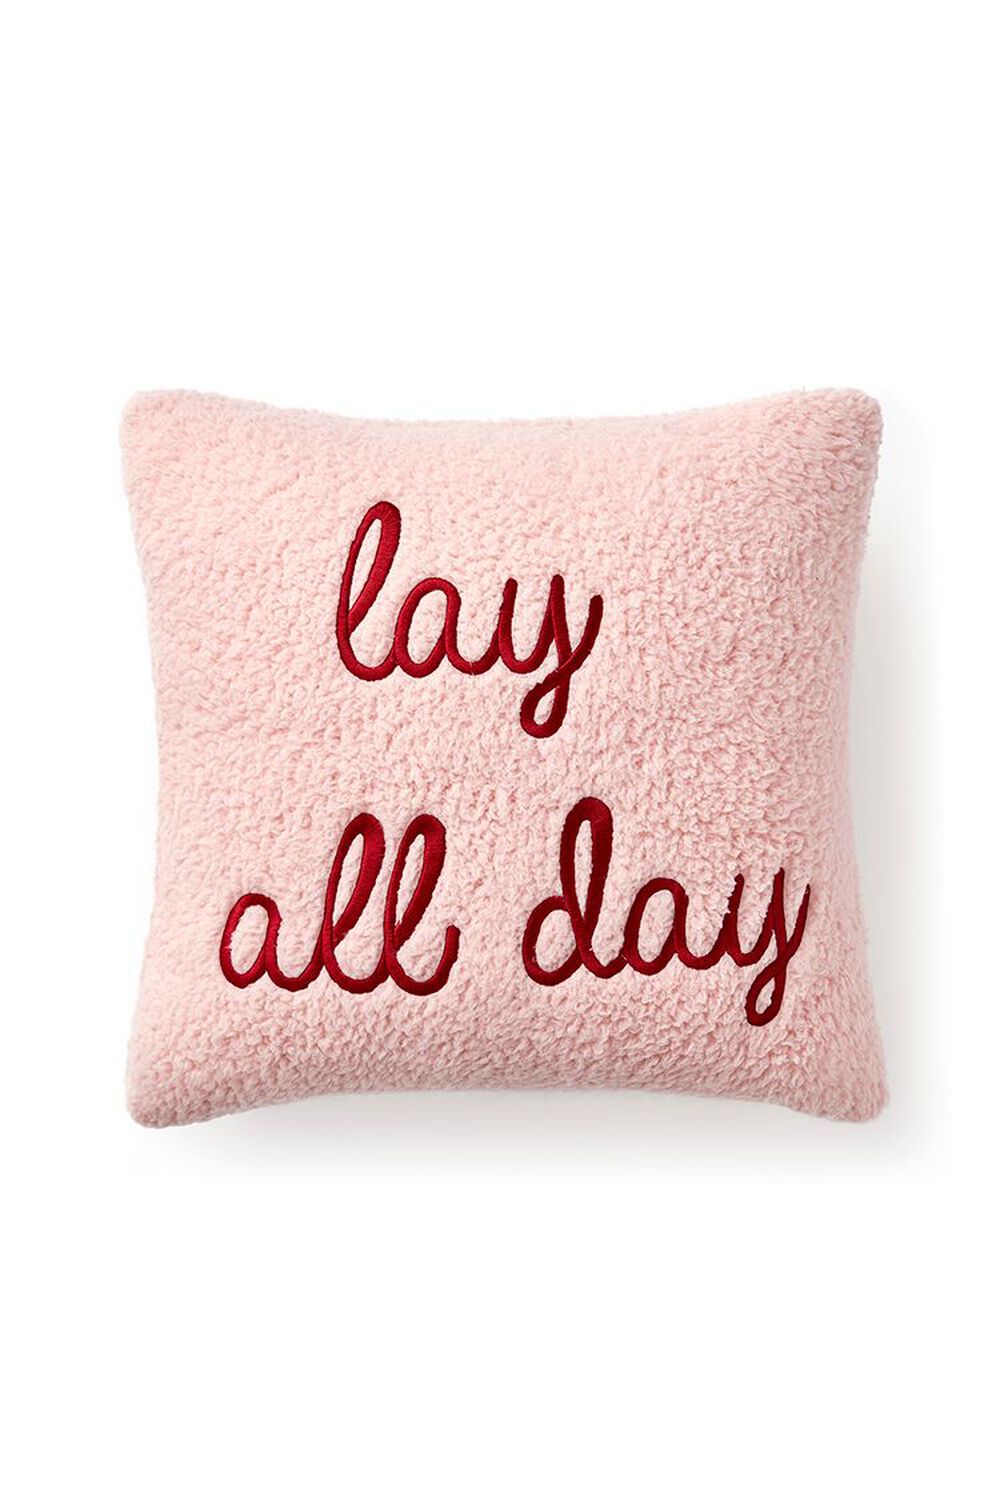 Embroidered Lay All Day Pillow, image 2